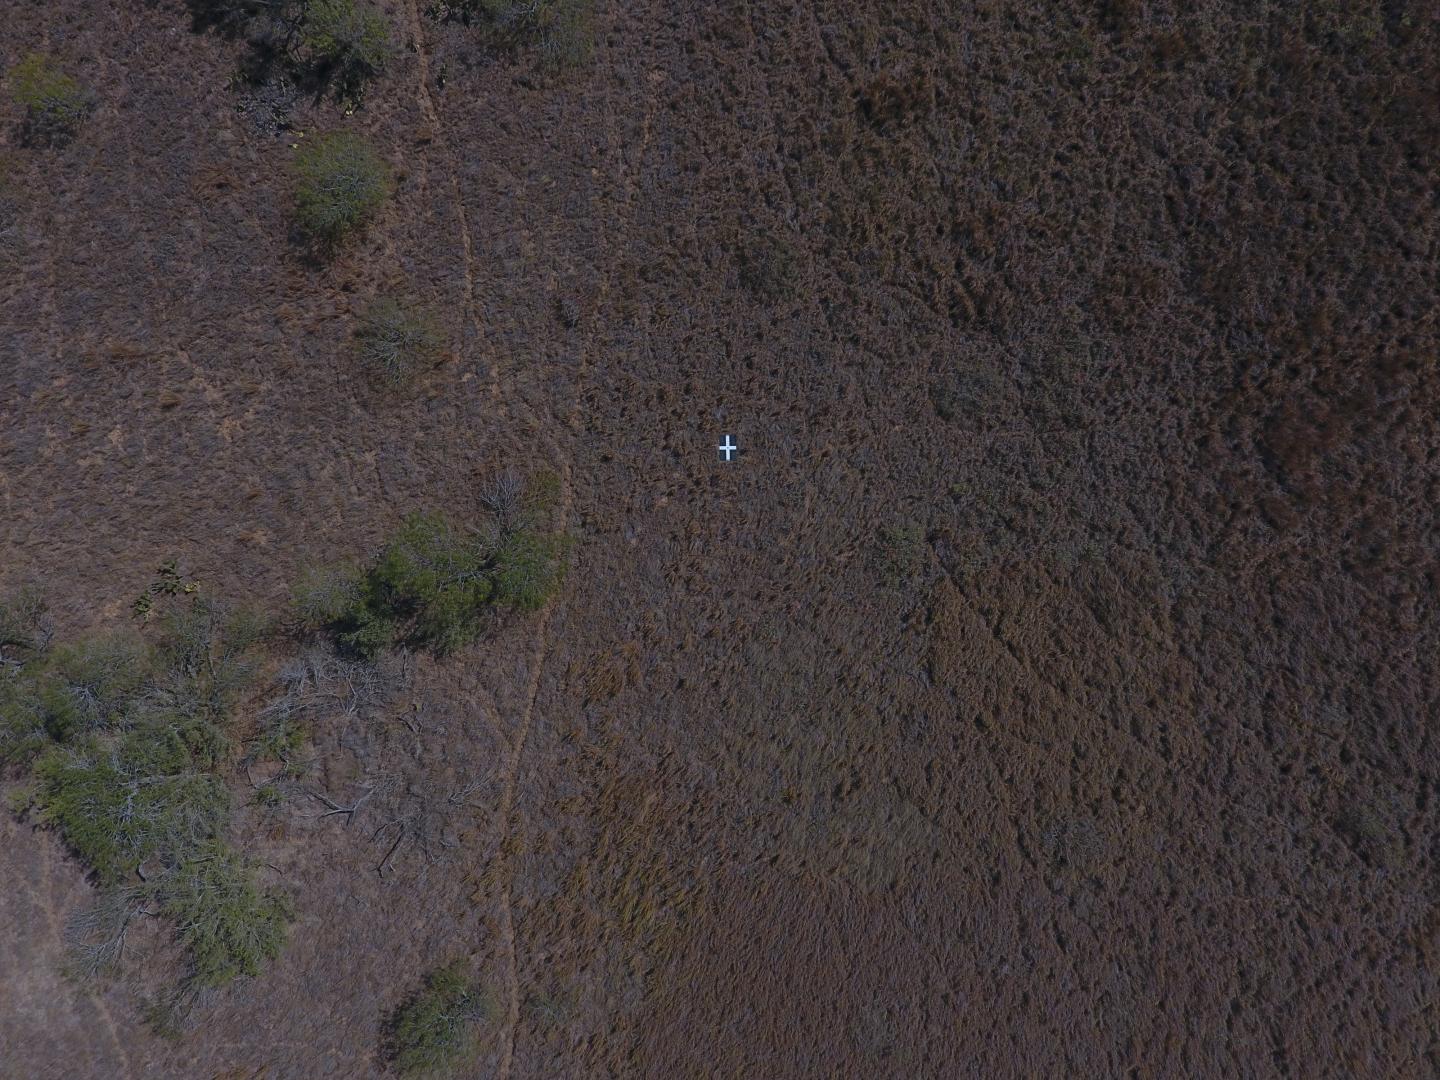 UAV View of Tanglehead Invasion in South Texas